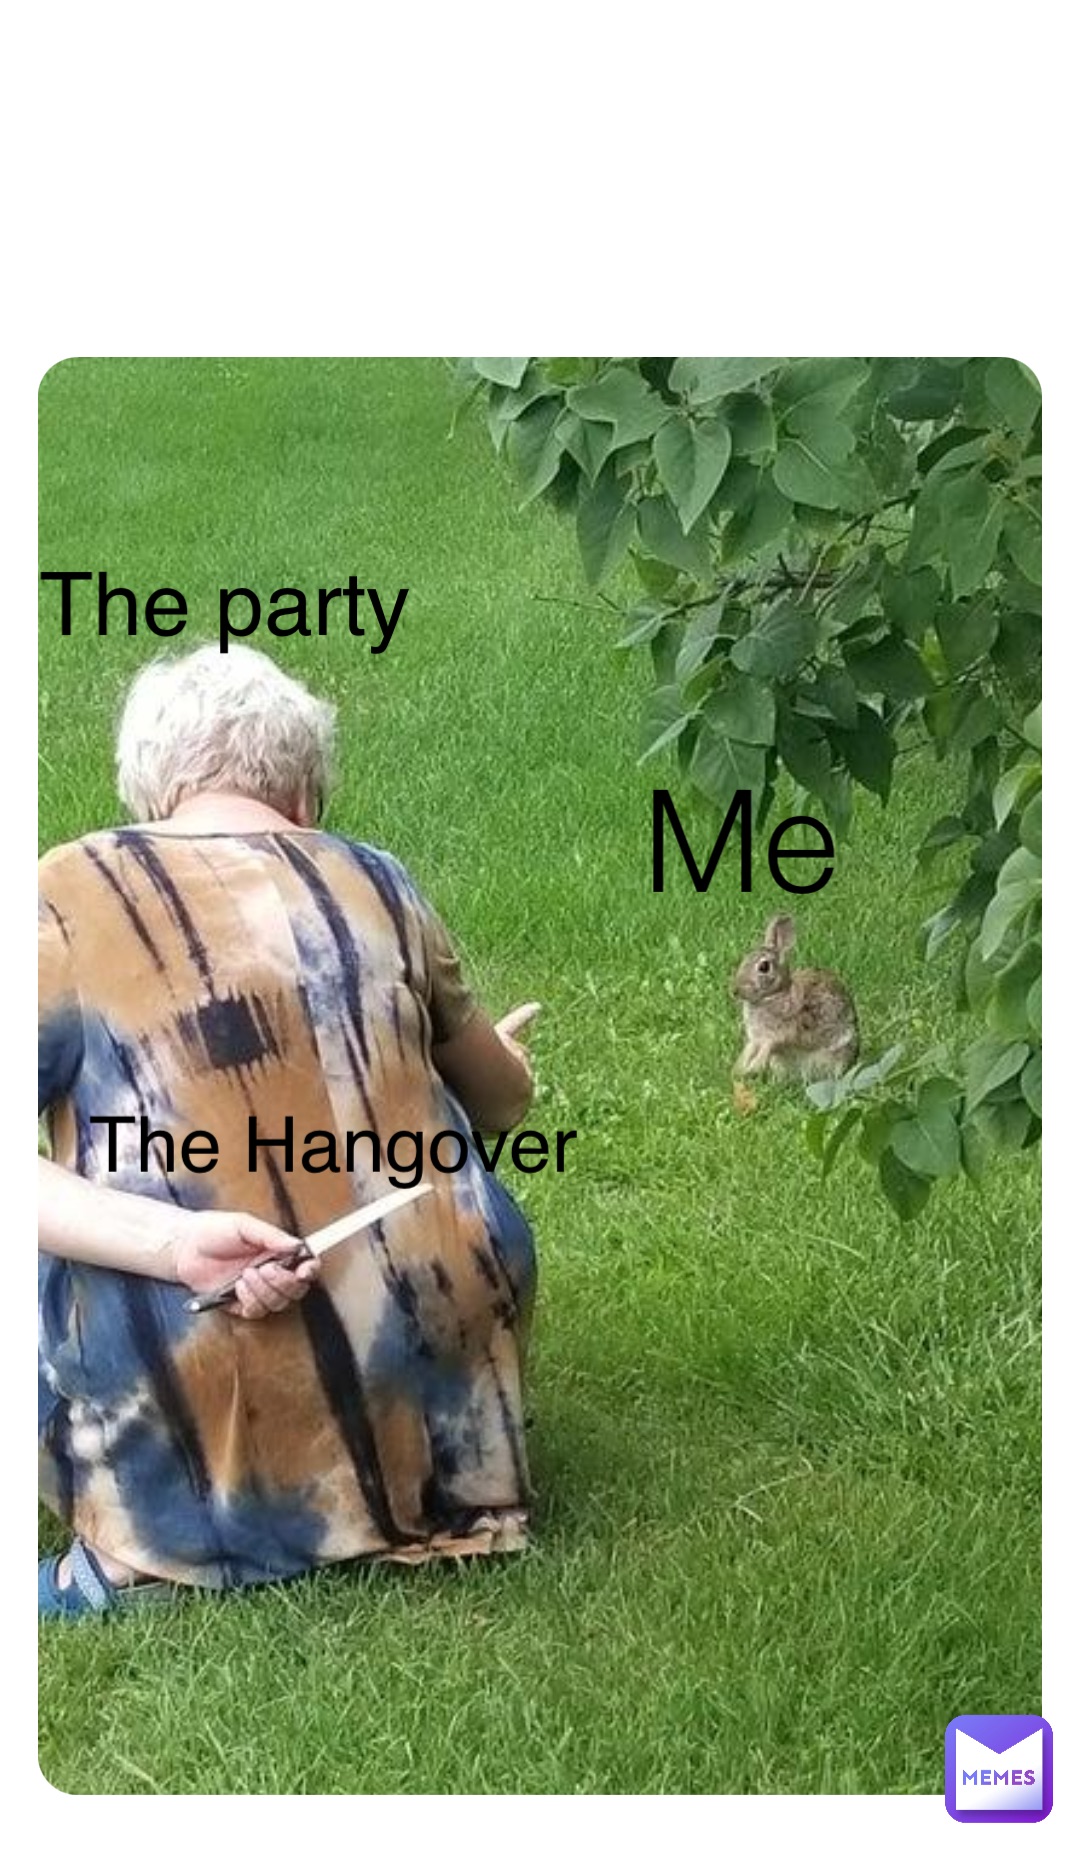 Me The Hangover The party